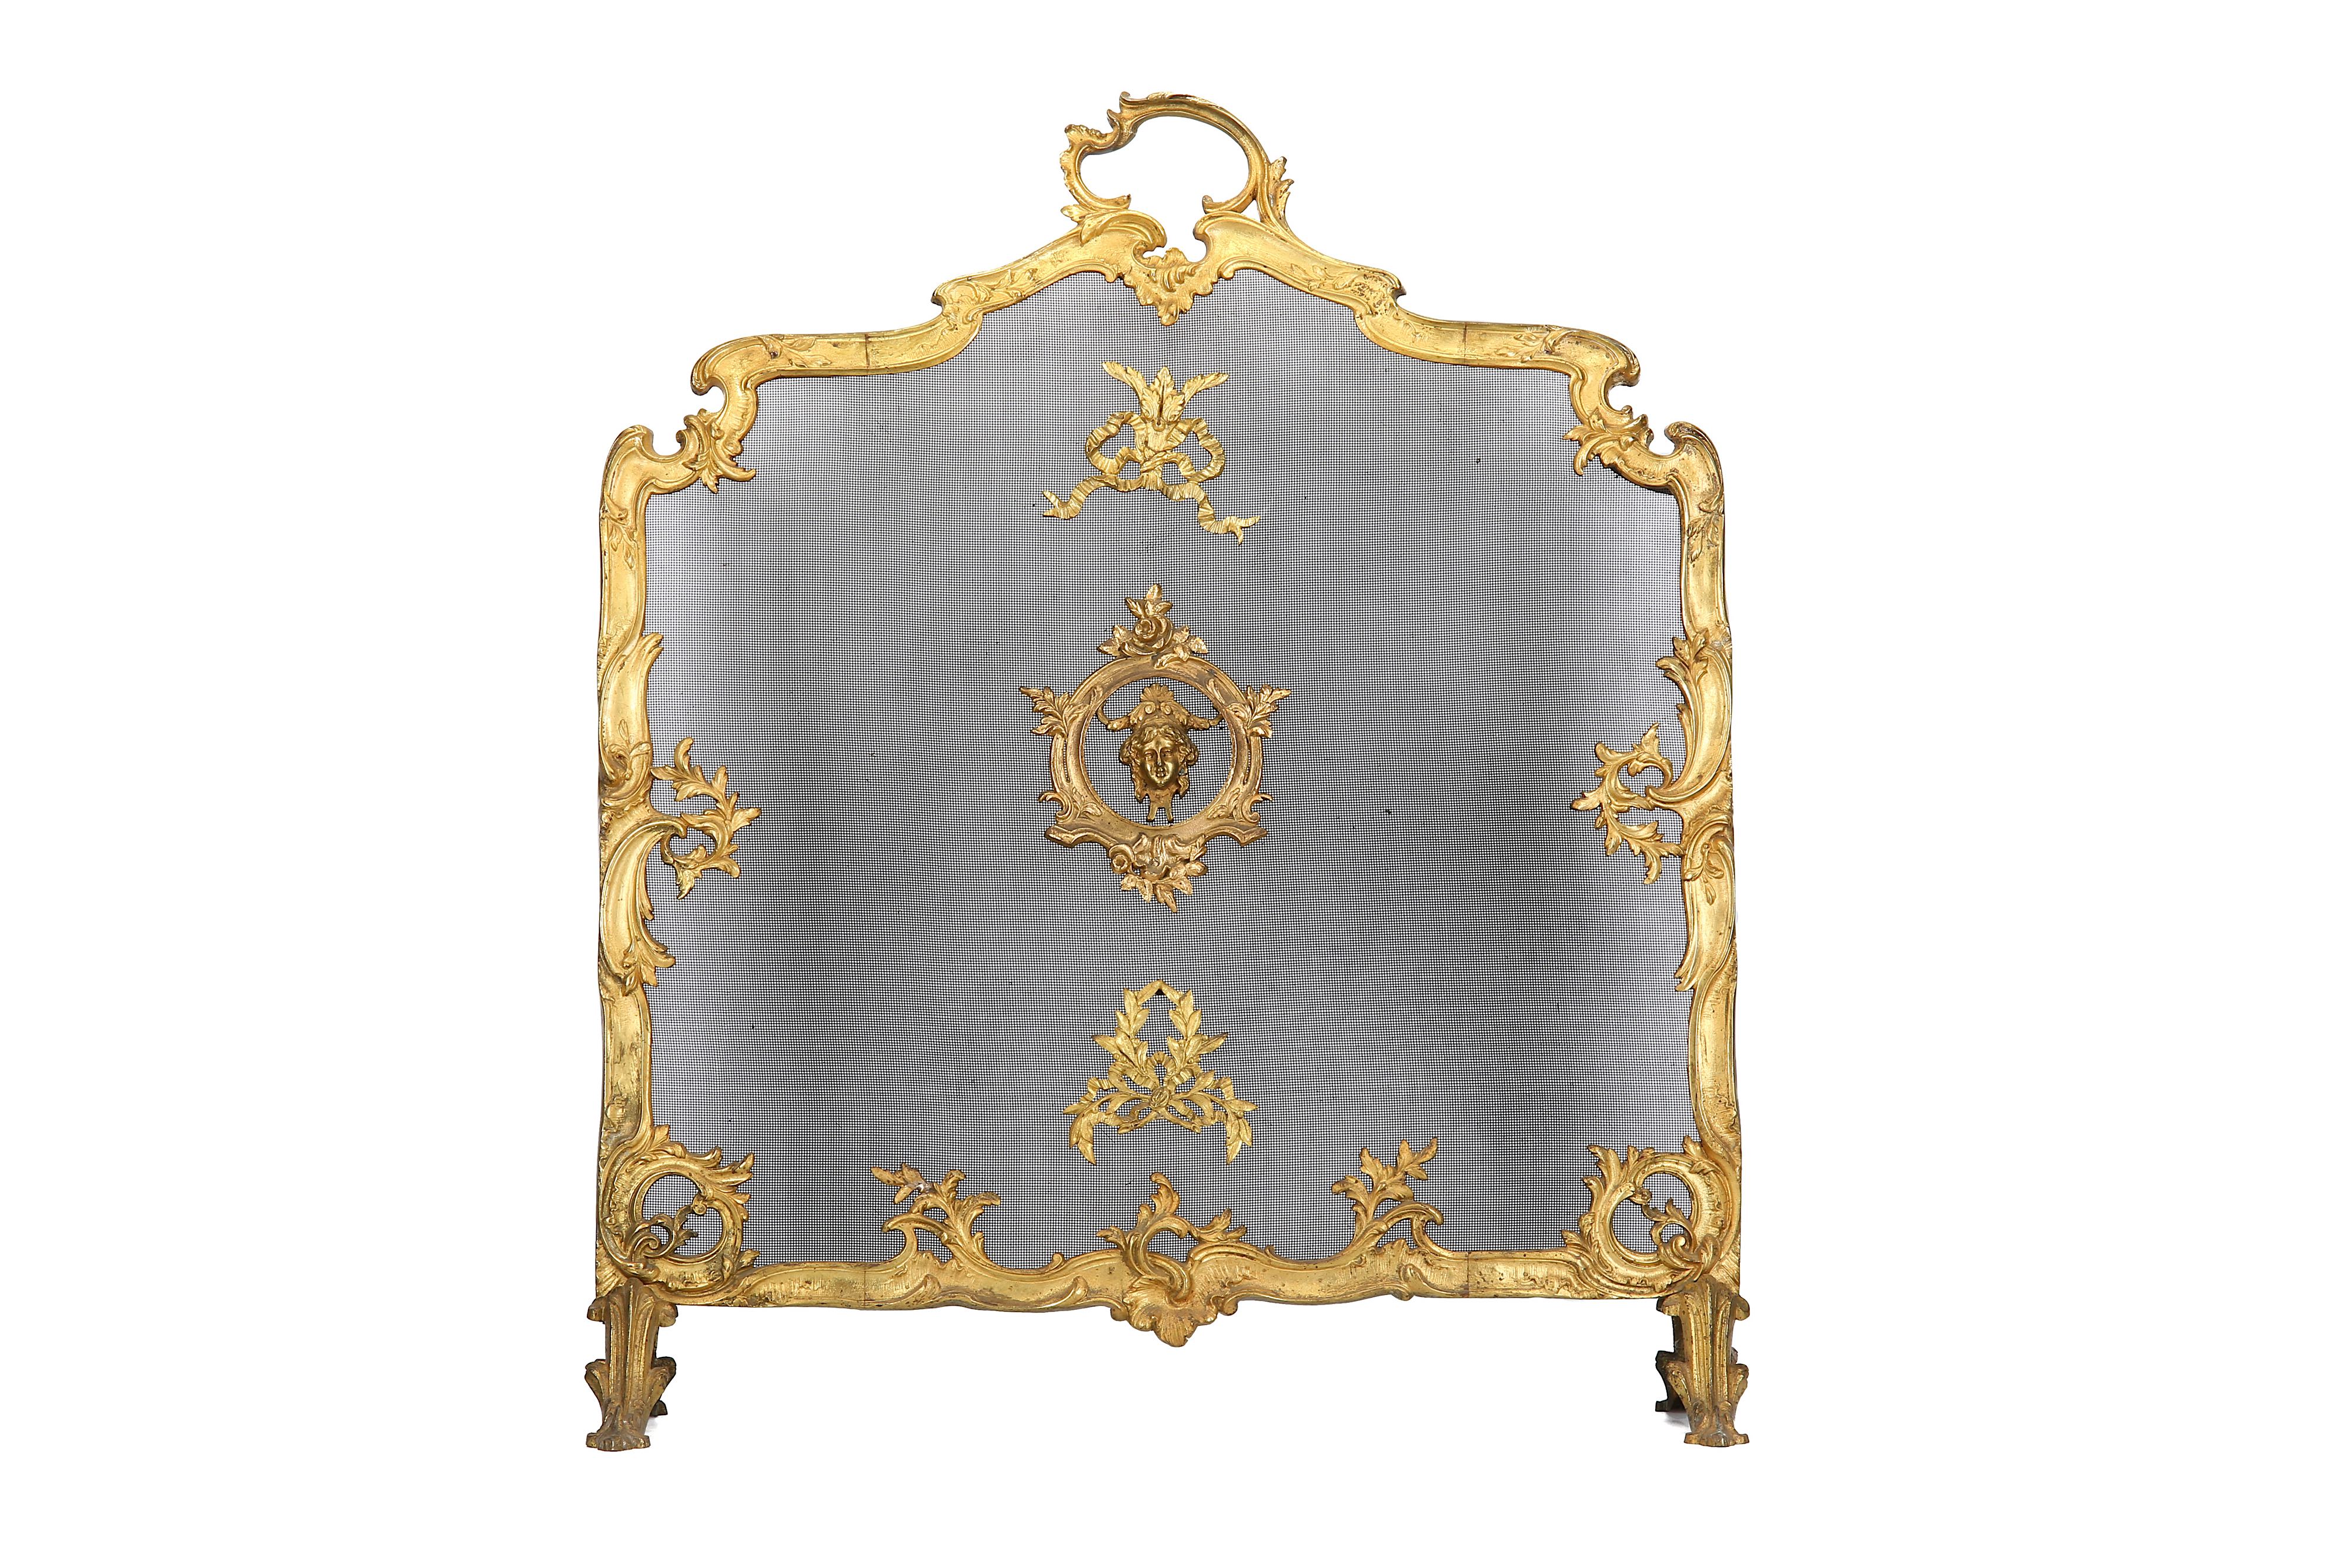 A 19TH CENTURY FRENCH GILT BRONZE FIRESCREEN IN THE LOUIS XV STYLE t